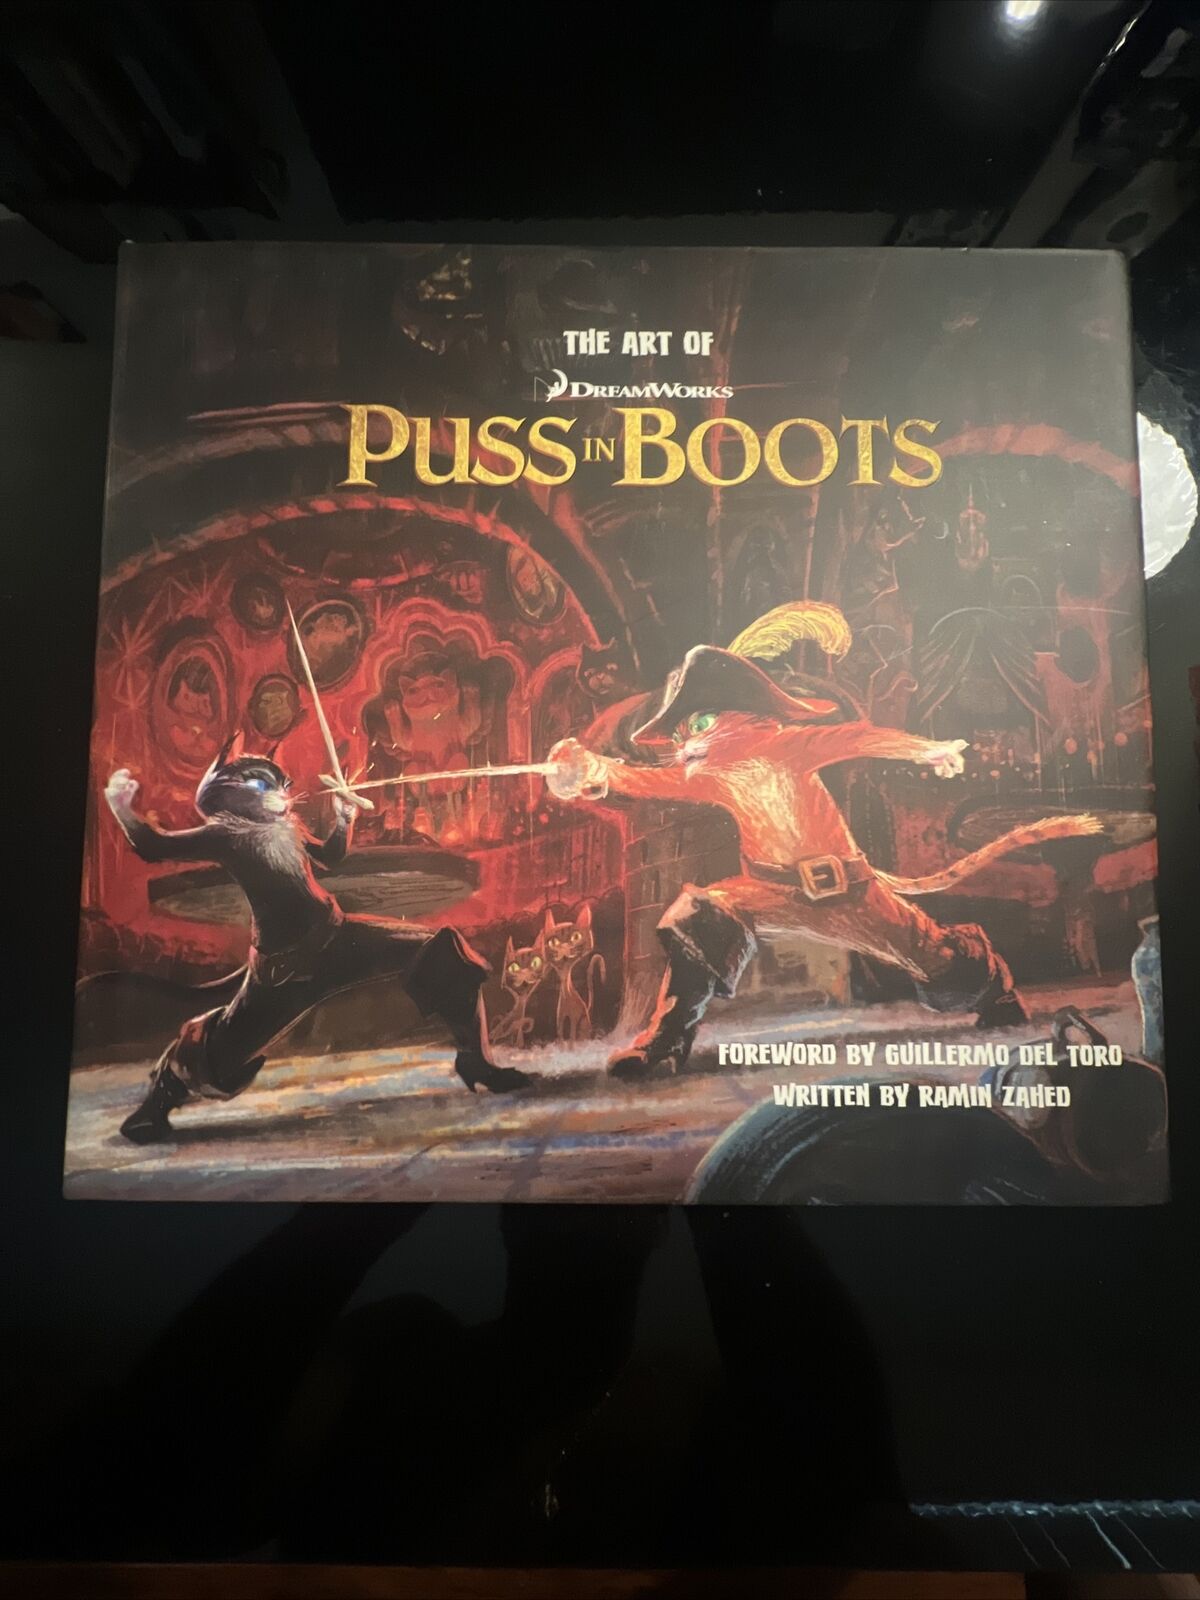 The Art of DreamWorks Puss in Boots Signed 5 Signatures and doodles